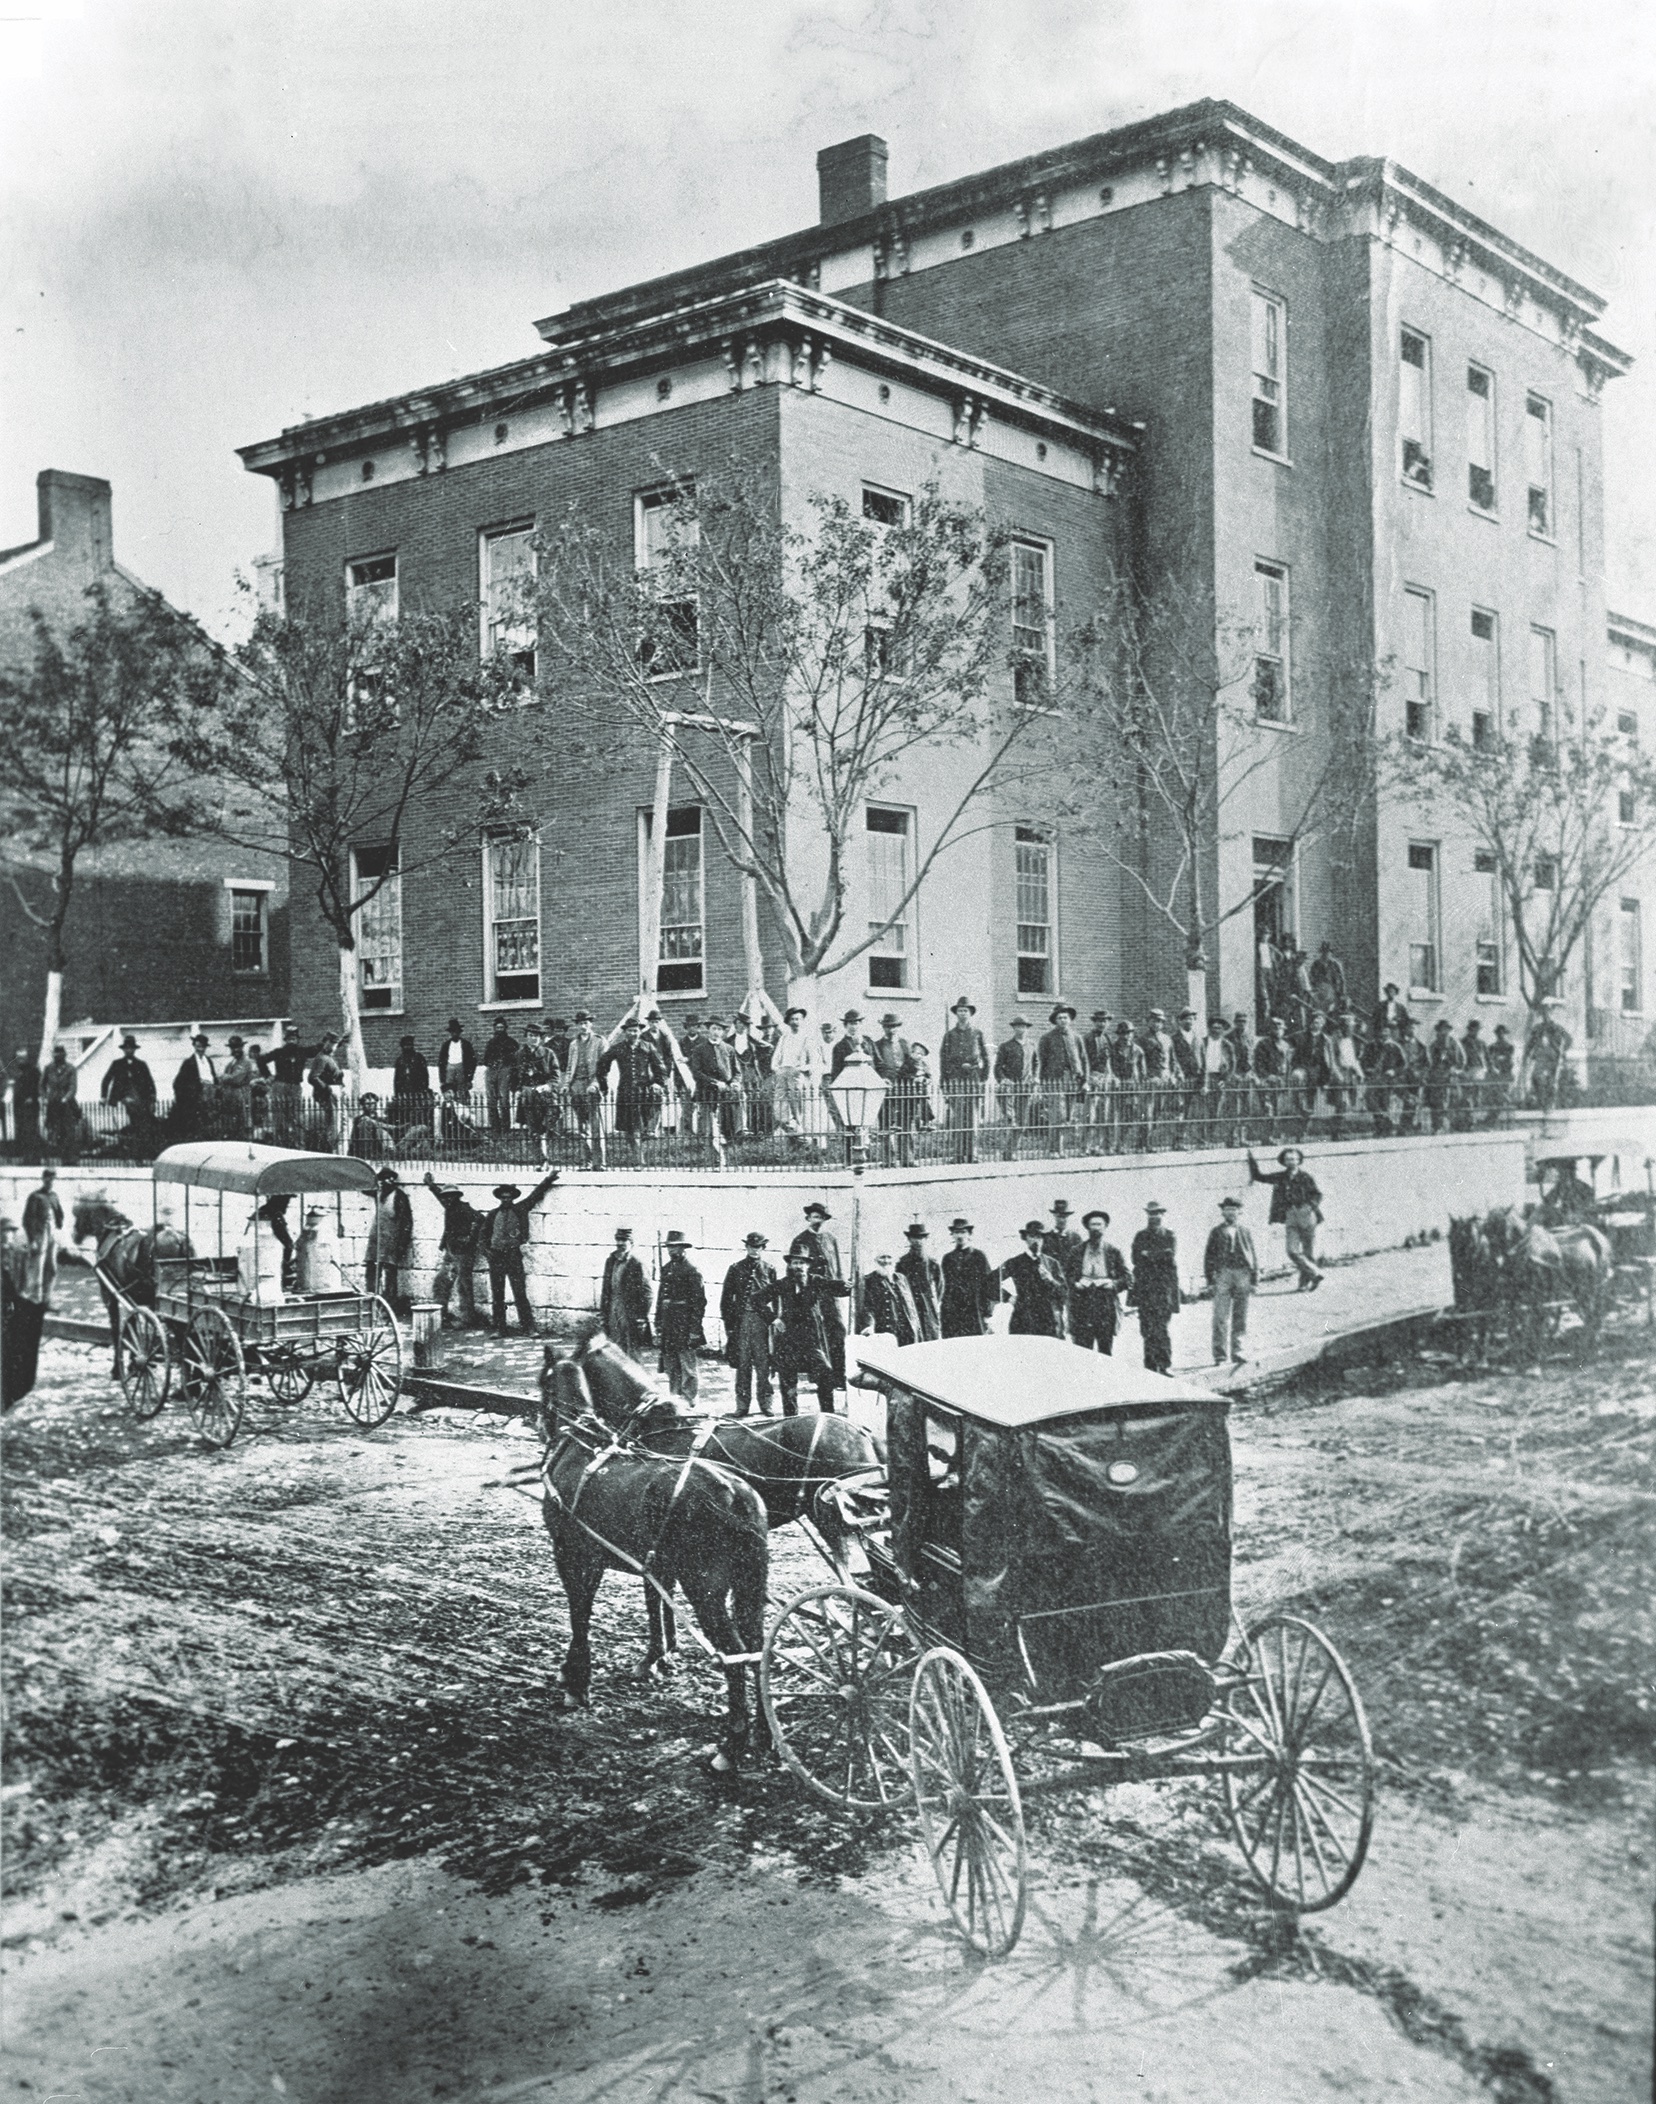 Hospital 11, nicknamed “The Pest House,” was dedicated to patients with venereal disease. Admissions spiked in February 1864 when furloughed troops returned. (Courtesy of the Tennessee State Library and Archives)